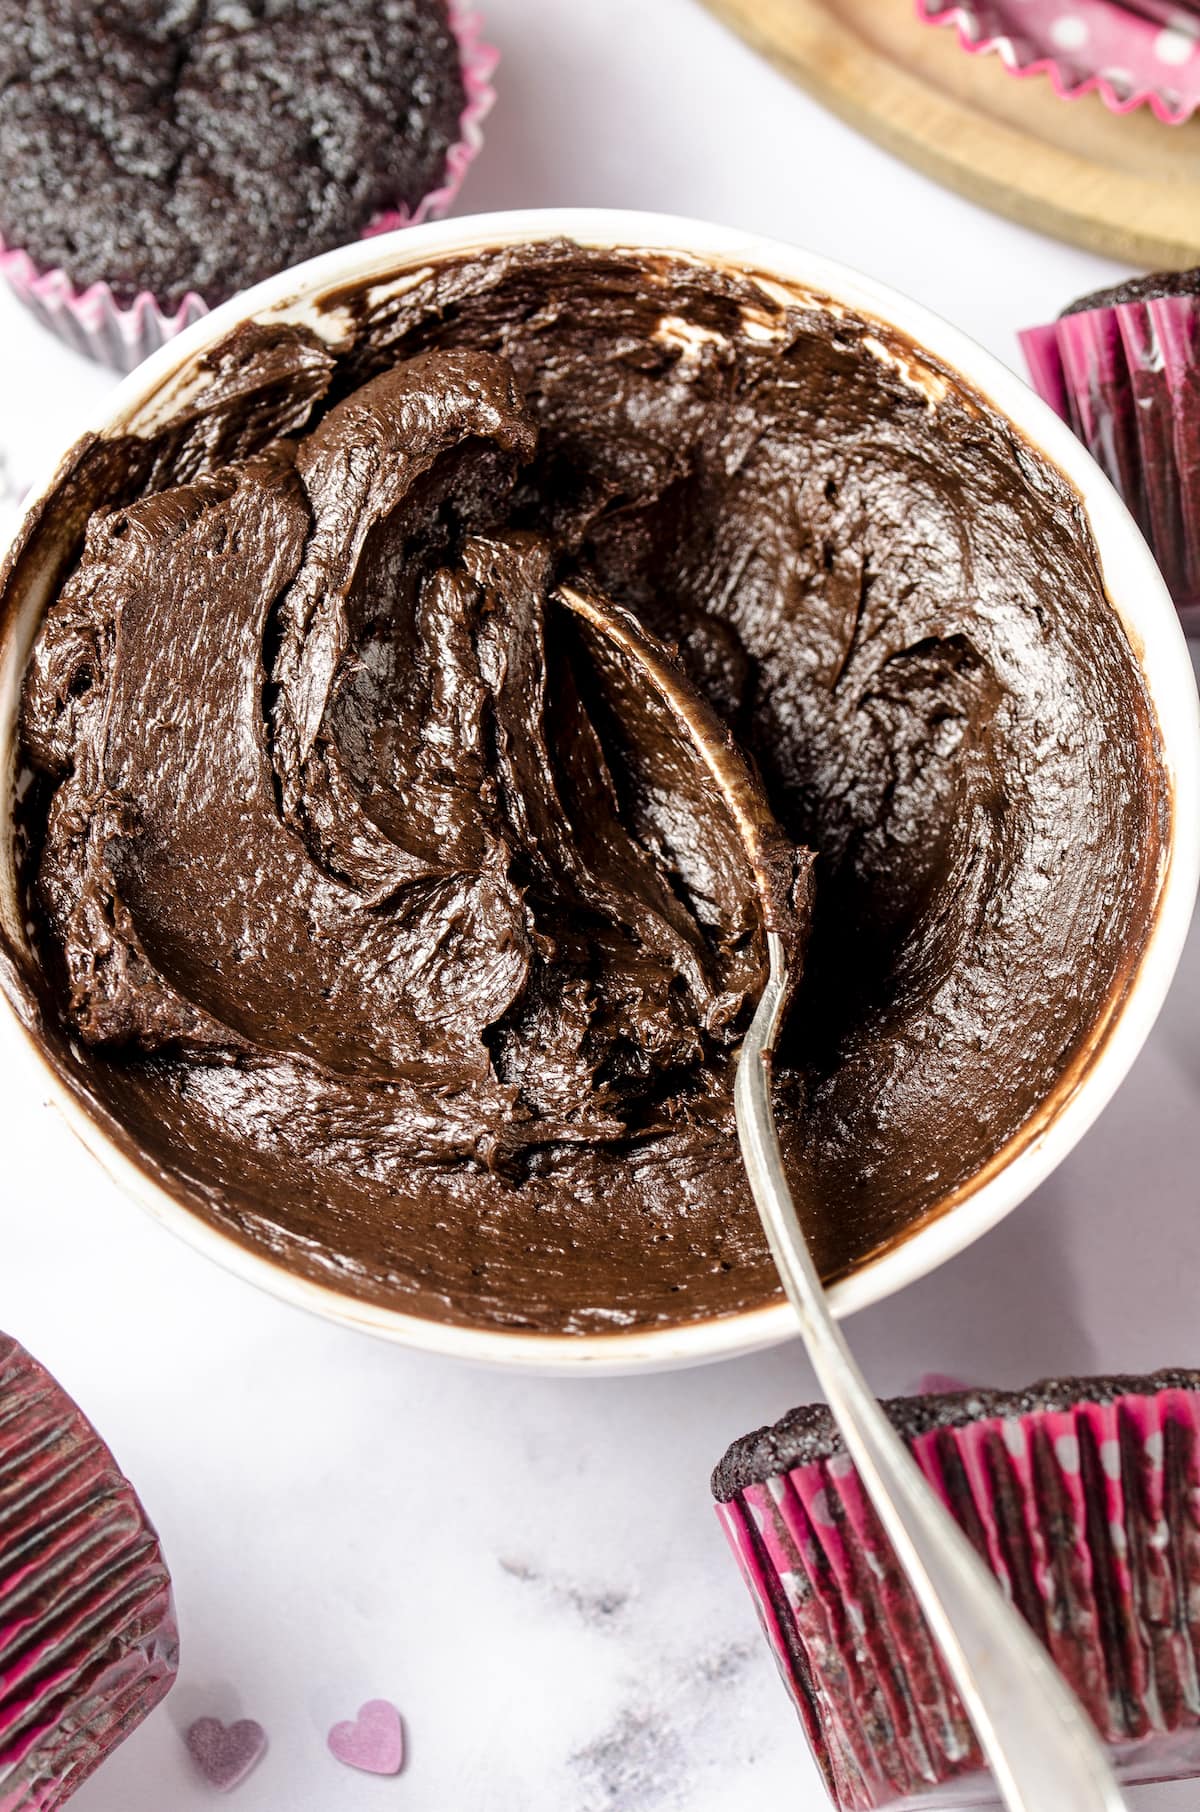 A mixing bowl of dark chocolate cake batter with a spoon.